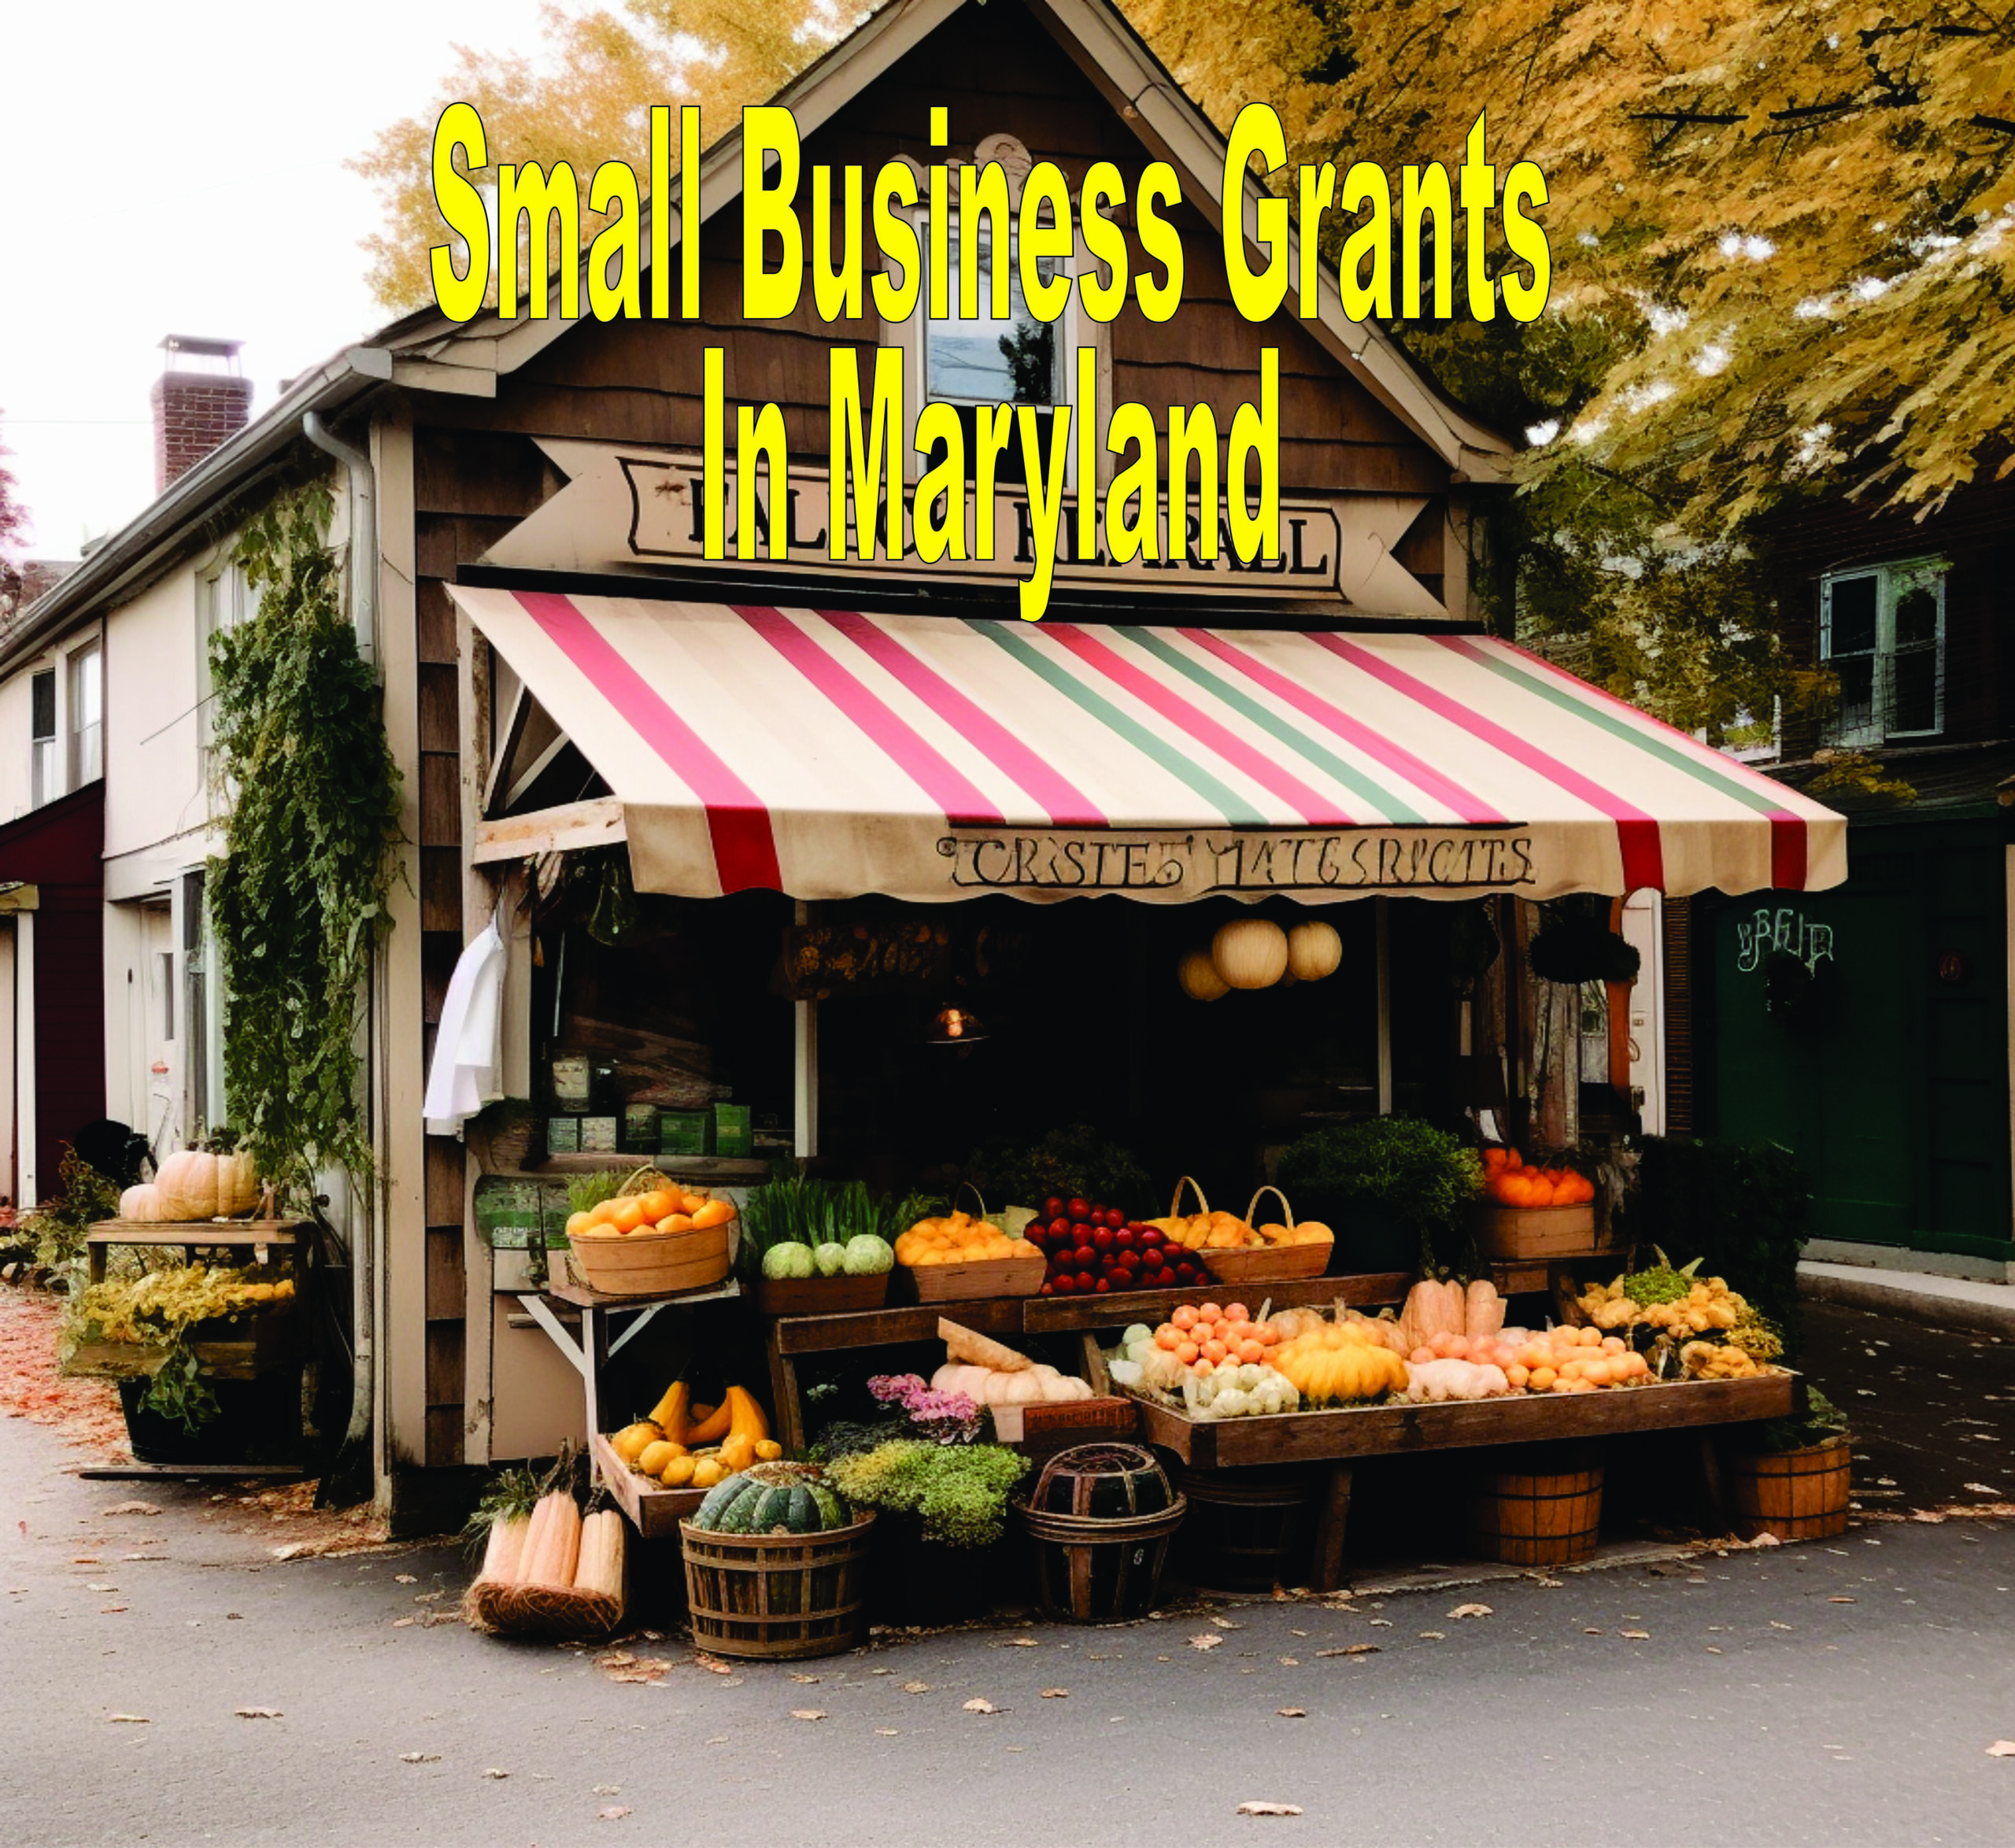 Small Business Grants In Maryland